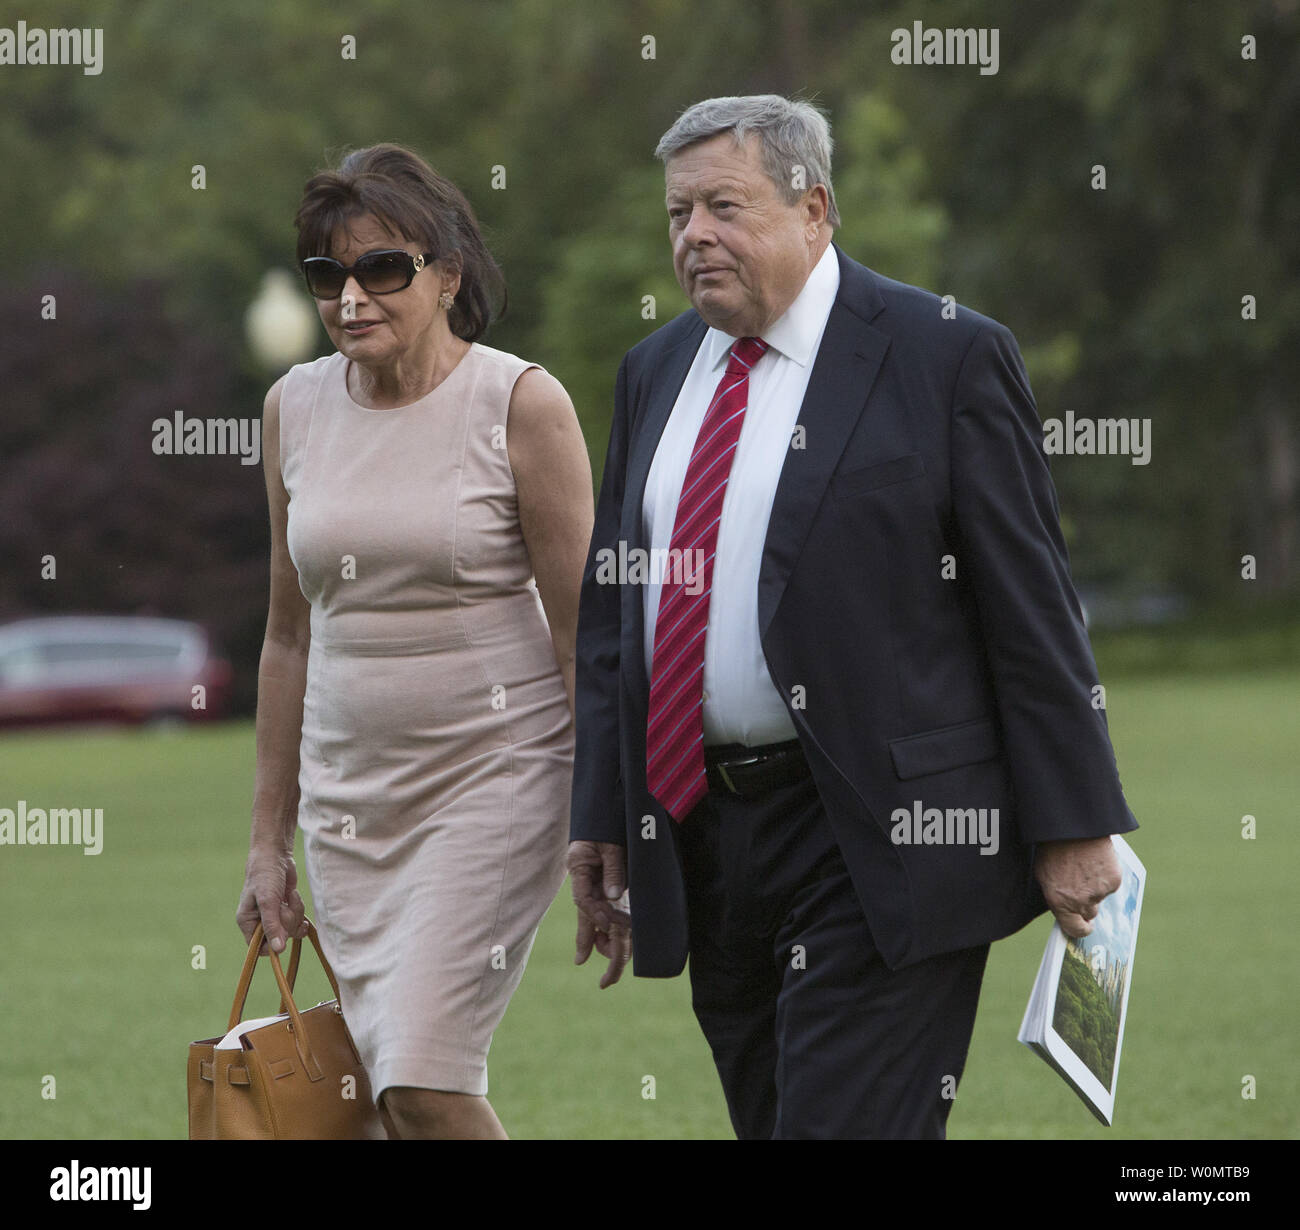 Viktor and Amalija Knavs, the parents of U.S. First Lady Melania Trump  arrive with U.S. President Donald Trump, Melania Trump and the Trumps, son  Barron at the White House in Washington, DC,